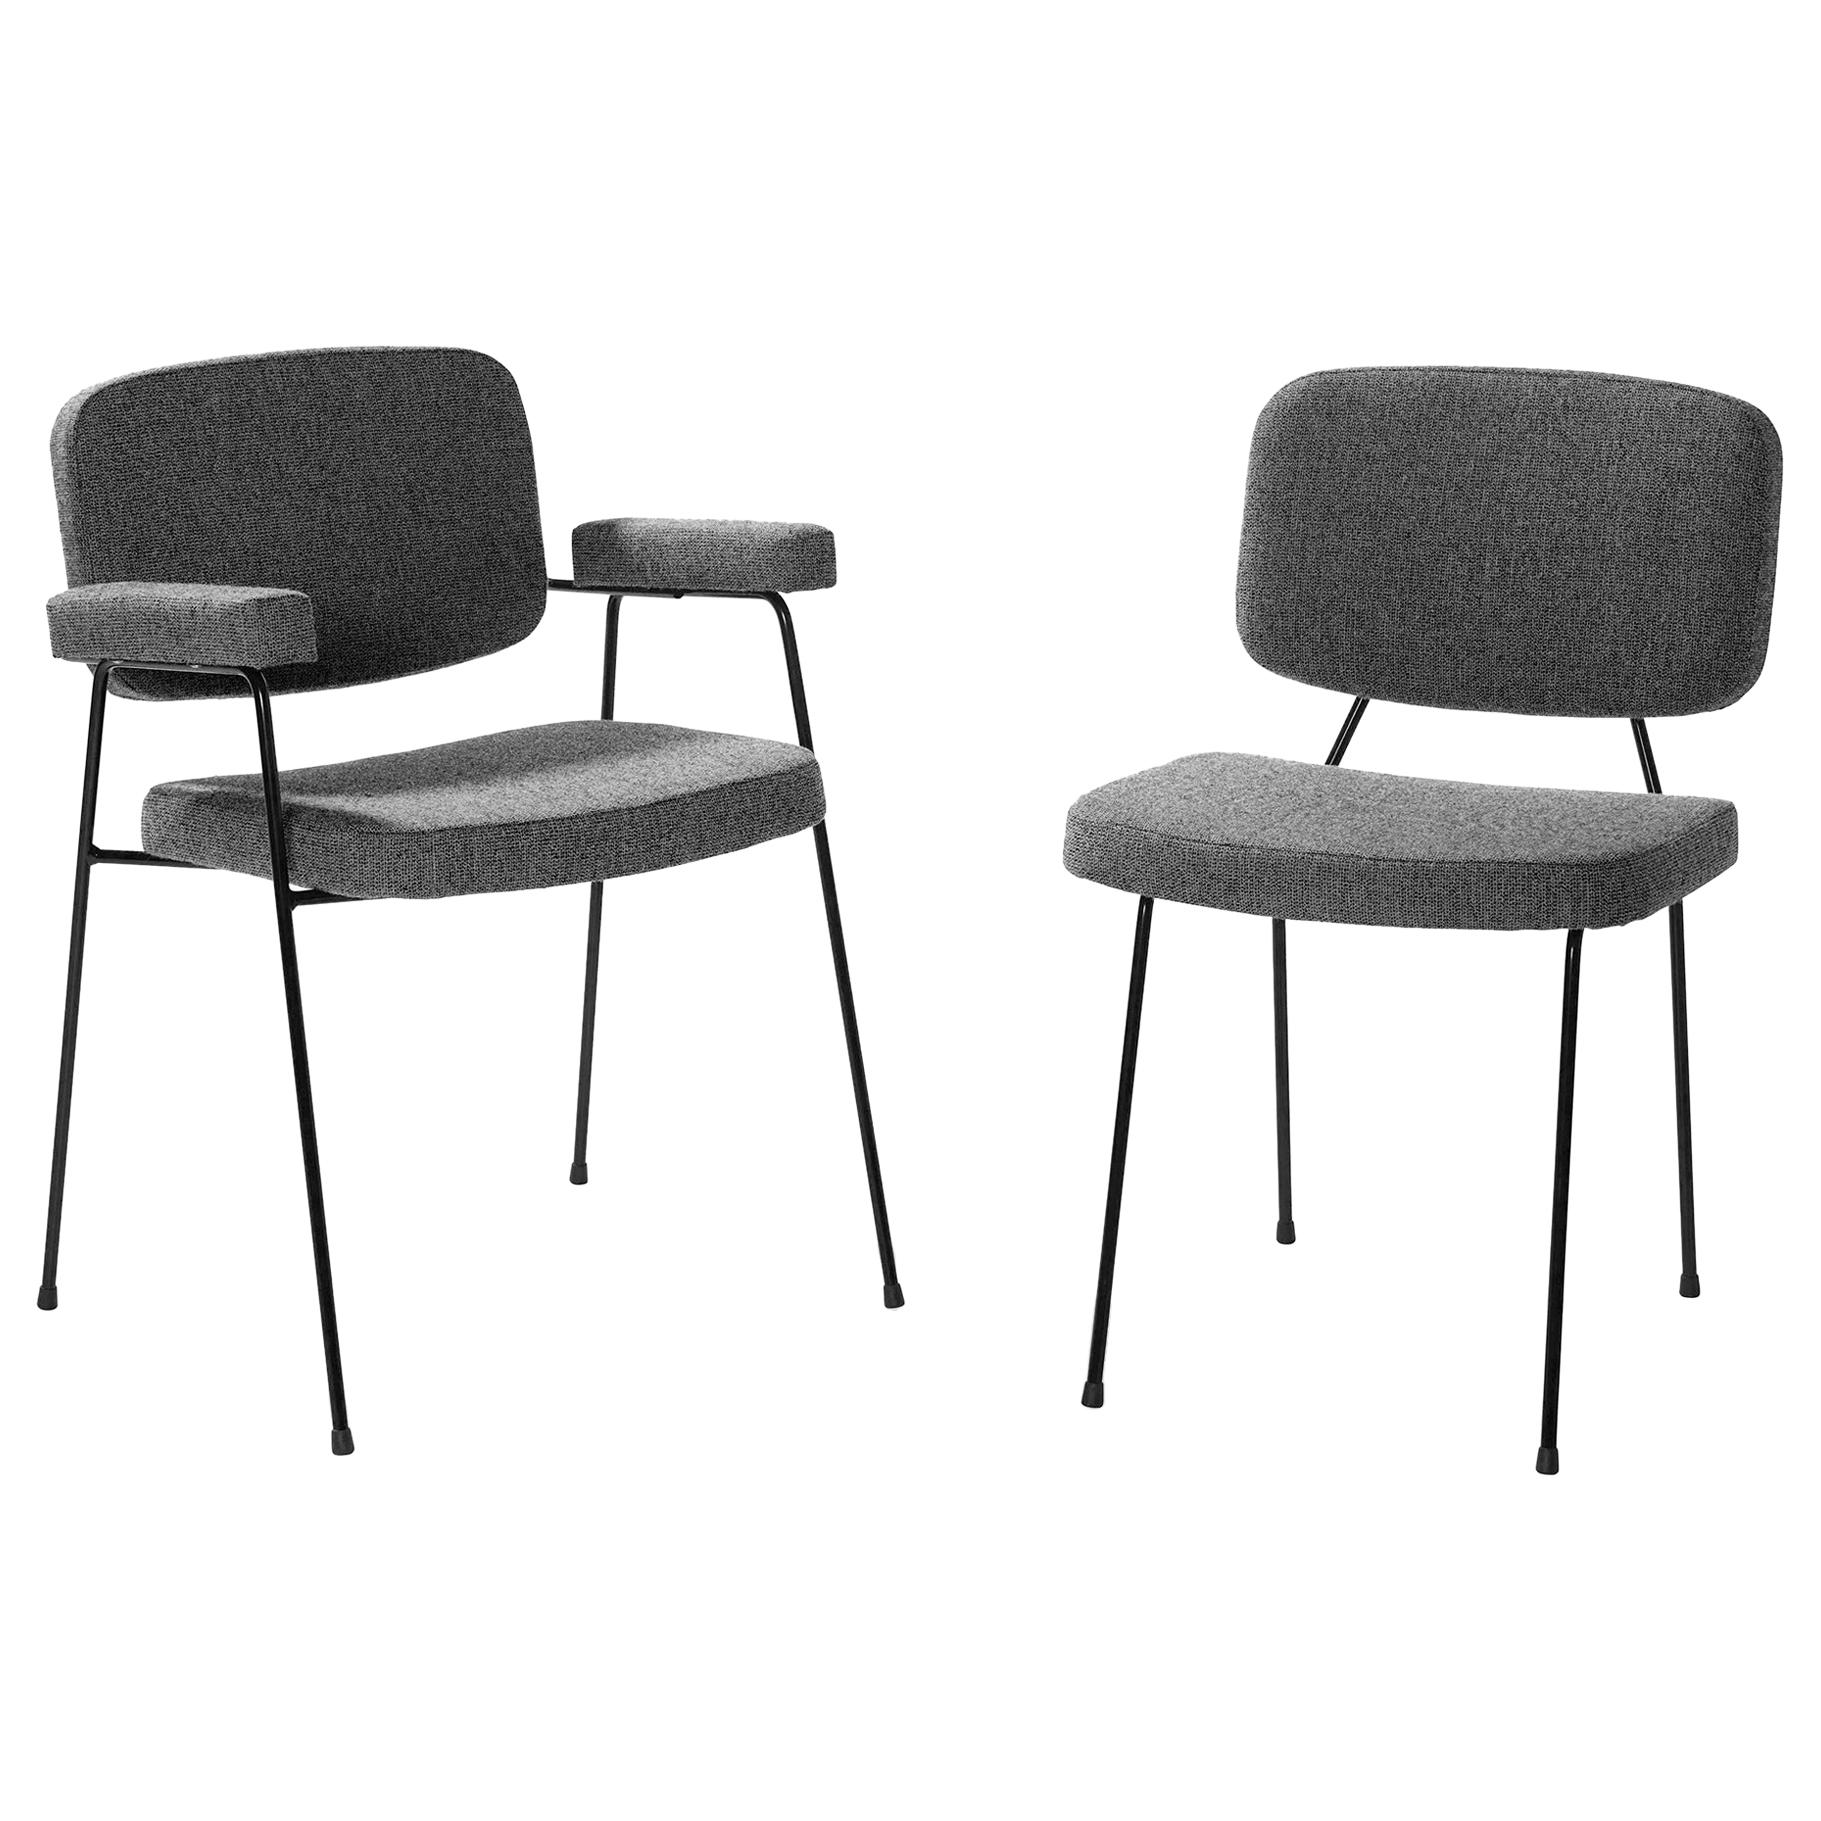 Set of Two Artifort Moulin Chairs in Raf Simons Fabric by Pierre Paulin